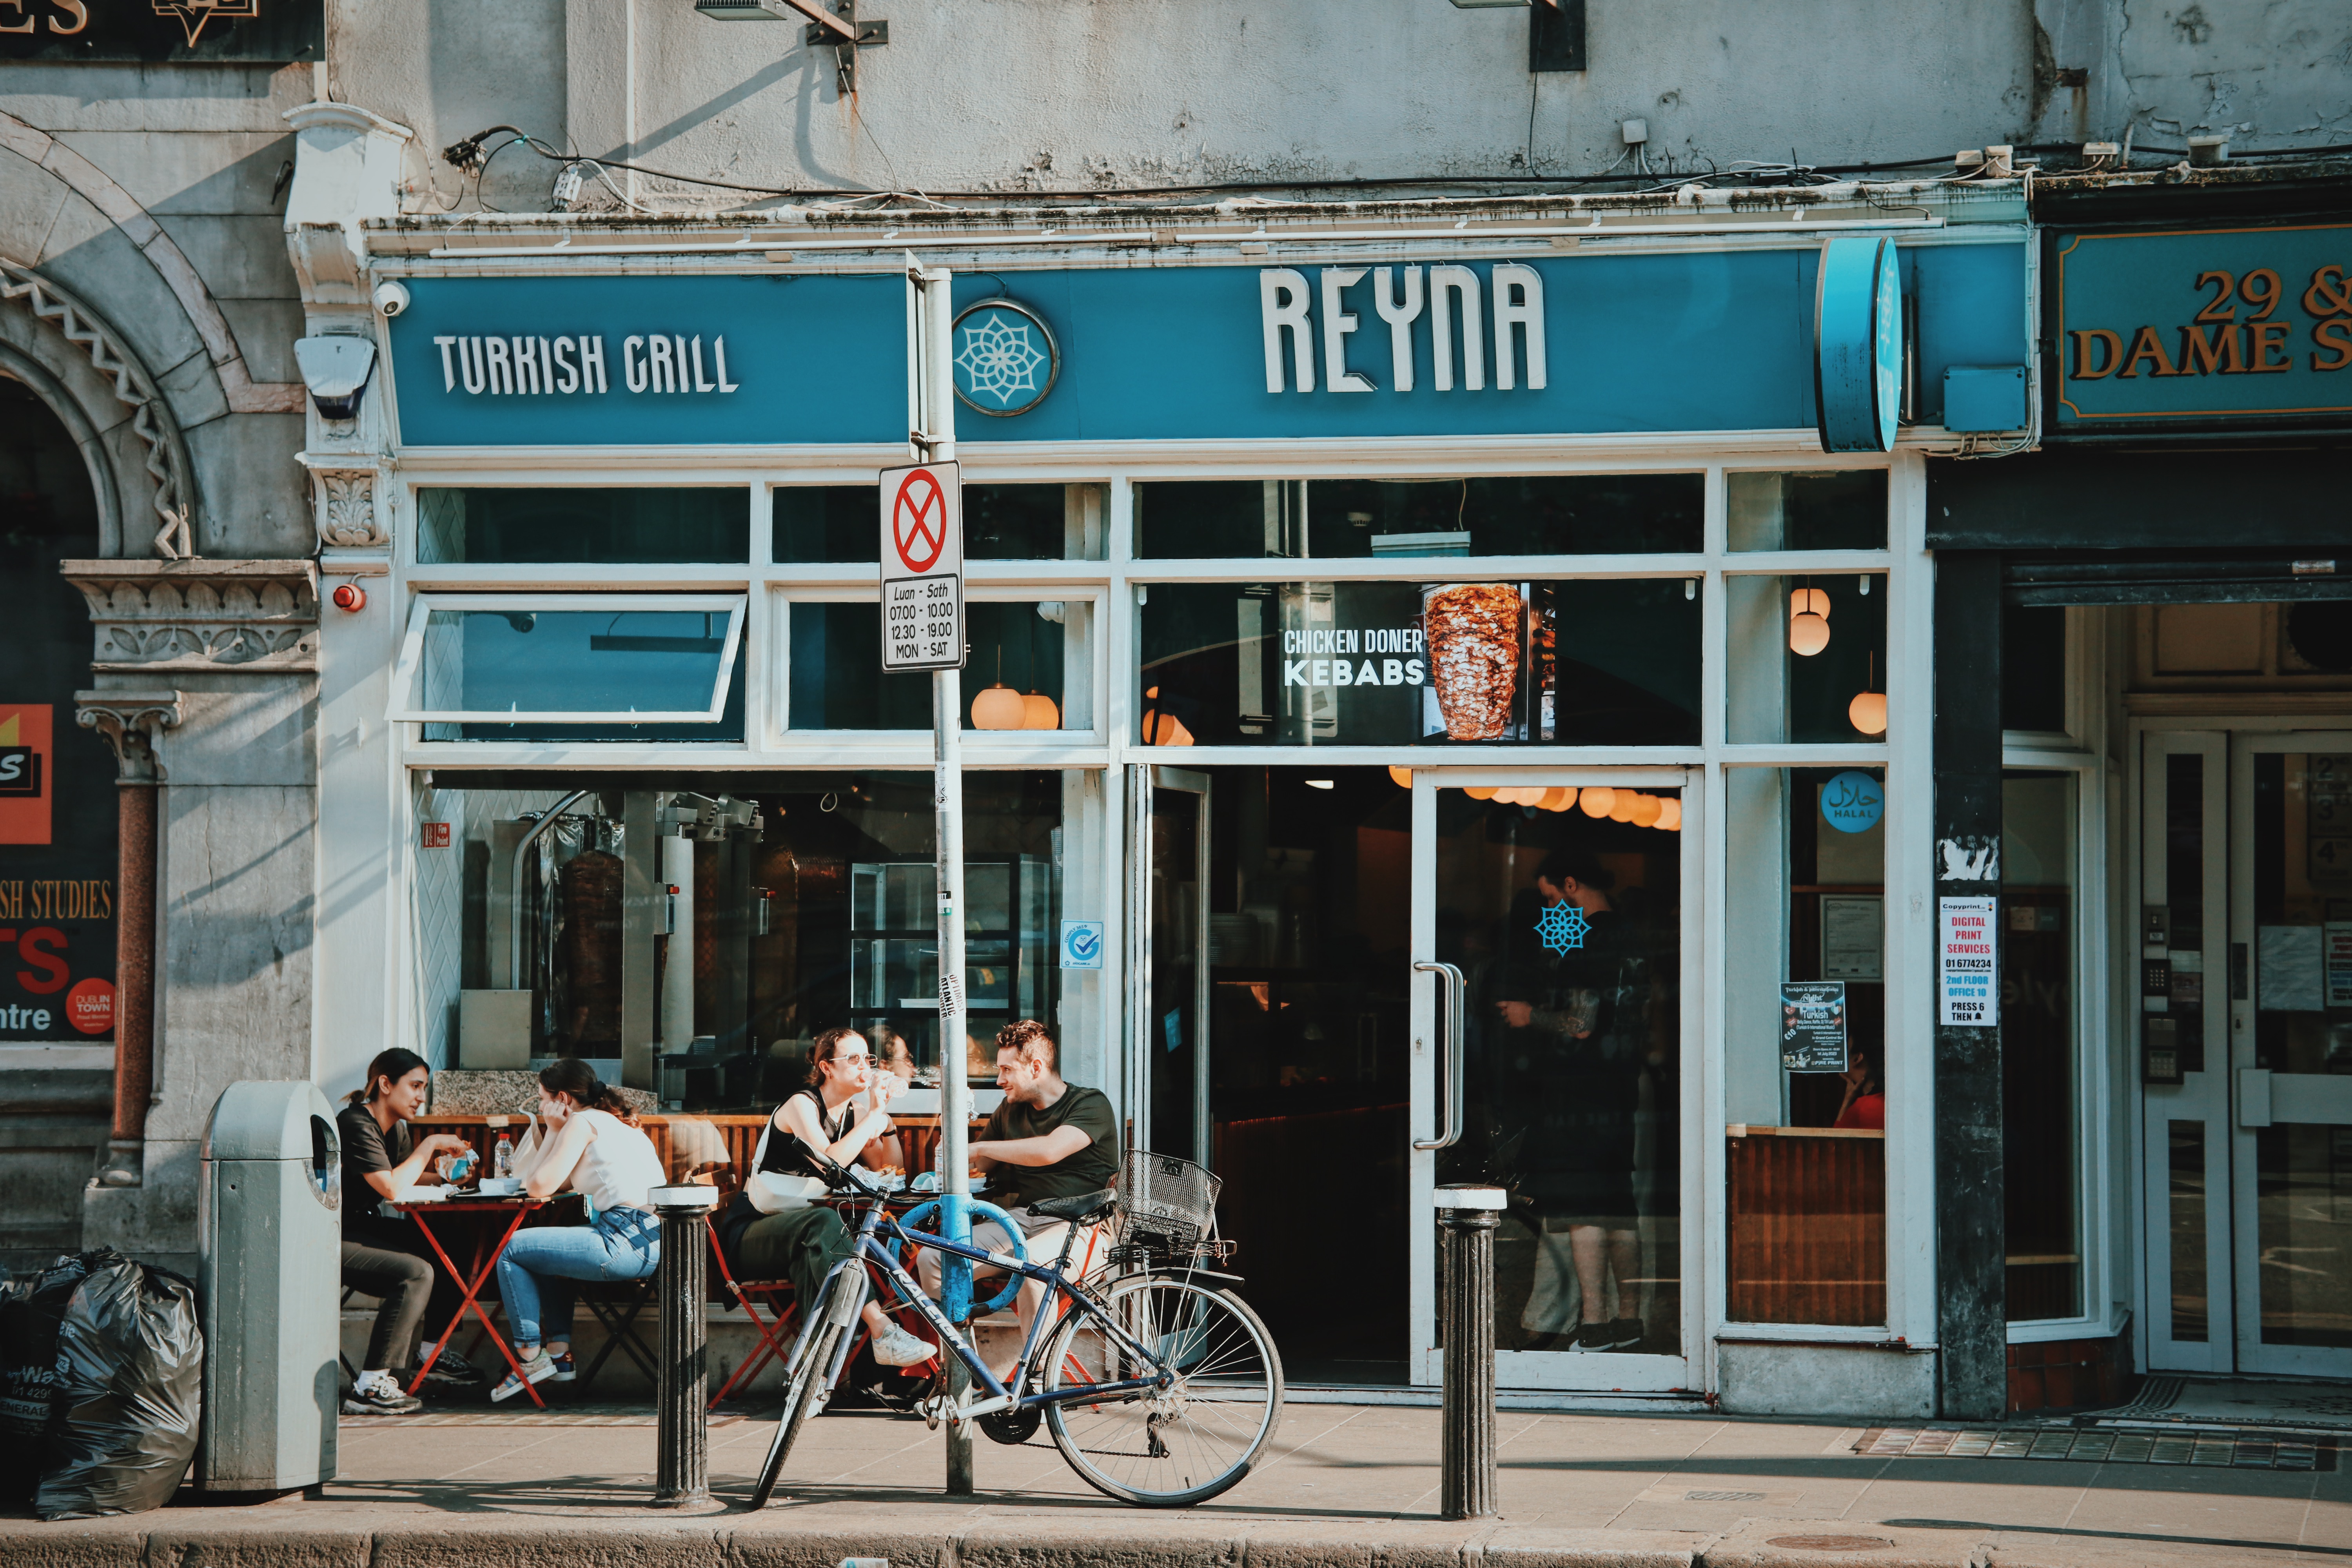 Customers sit at tables outside a restaurant with signs advertising Reyna and Turkish Grill.